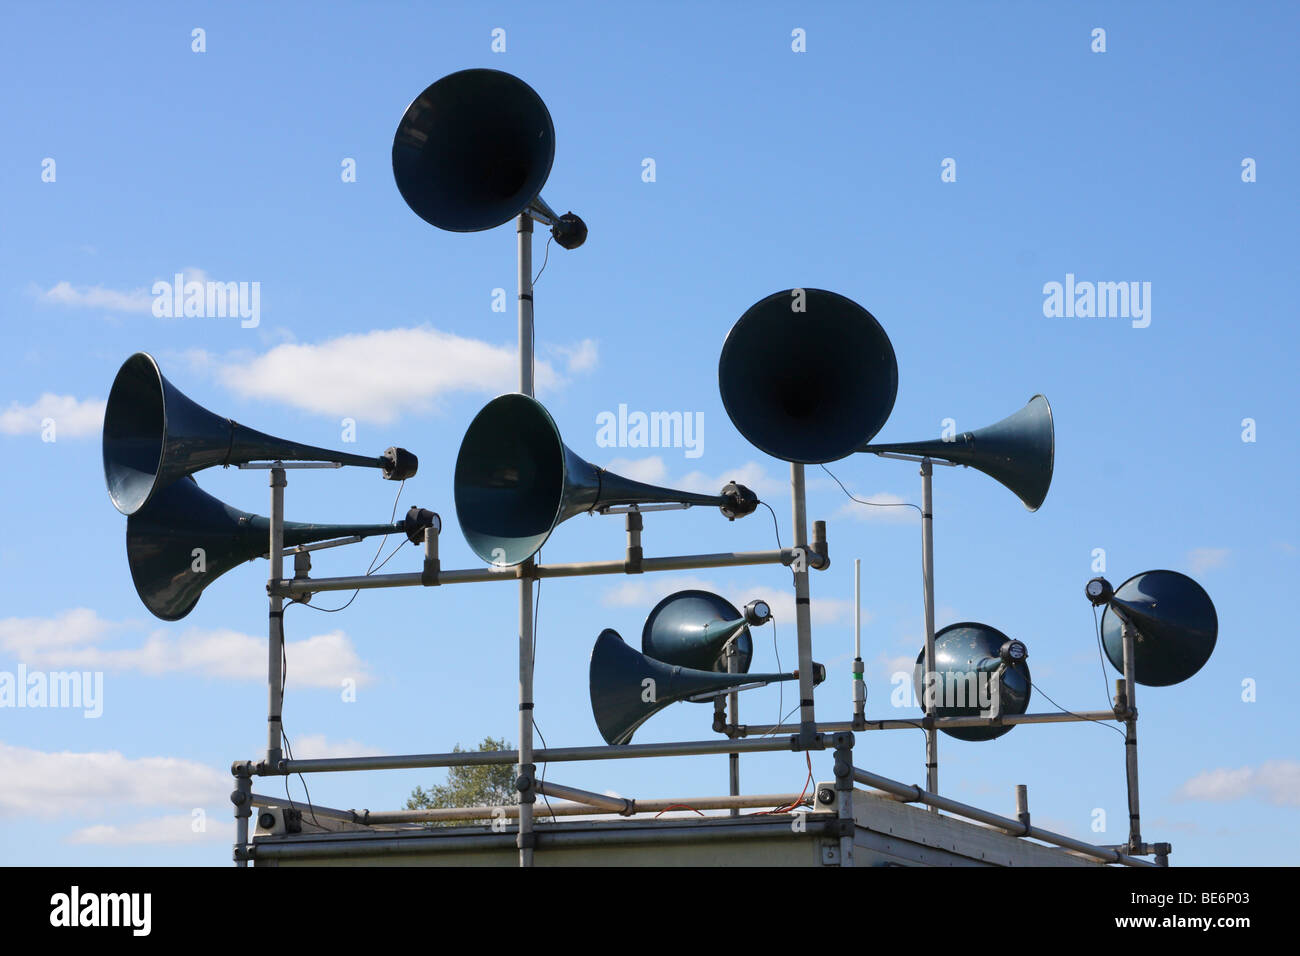 A public address system at an outdoor event in the U.K. Stock Photo